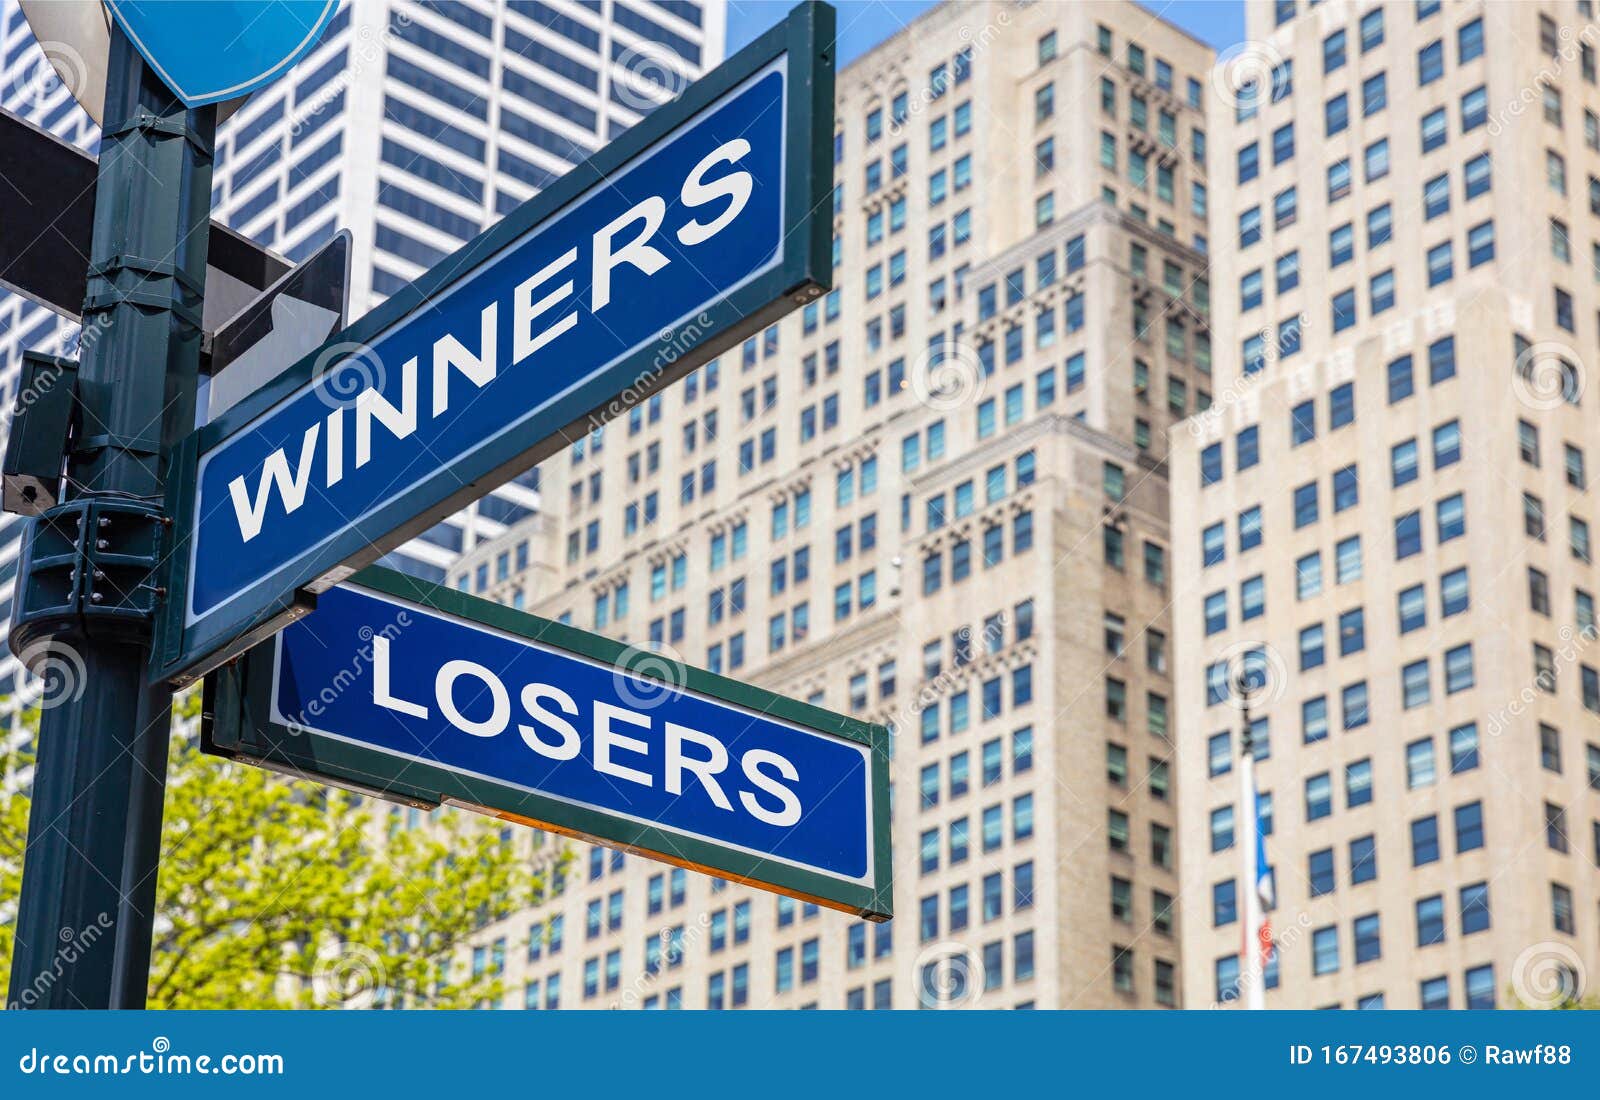 winners losers crossroads street sign. highrise buildings background